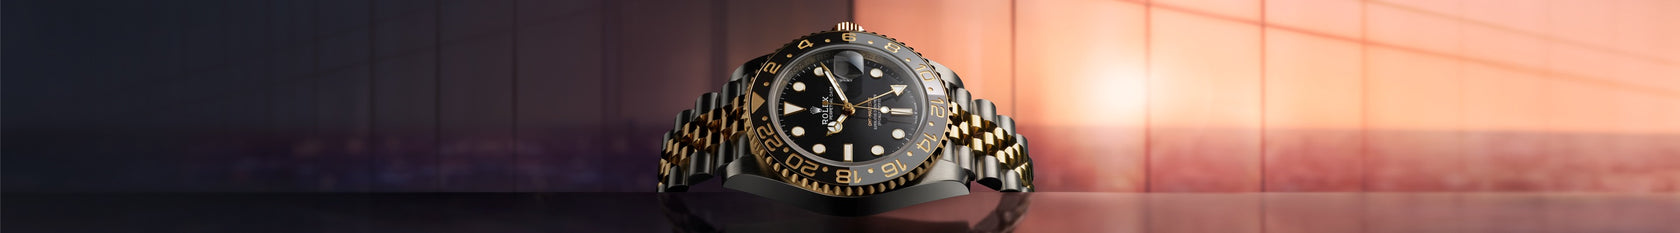 The Rolex GMT-Master II, ref 126713GRNR, lying on it's side with the sun in the background.